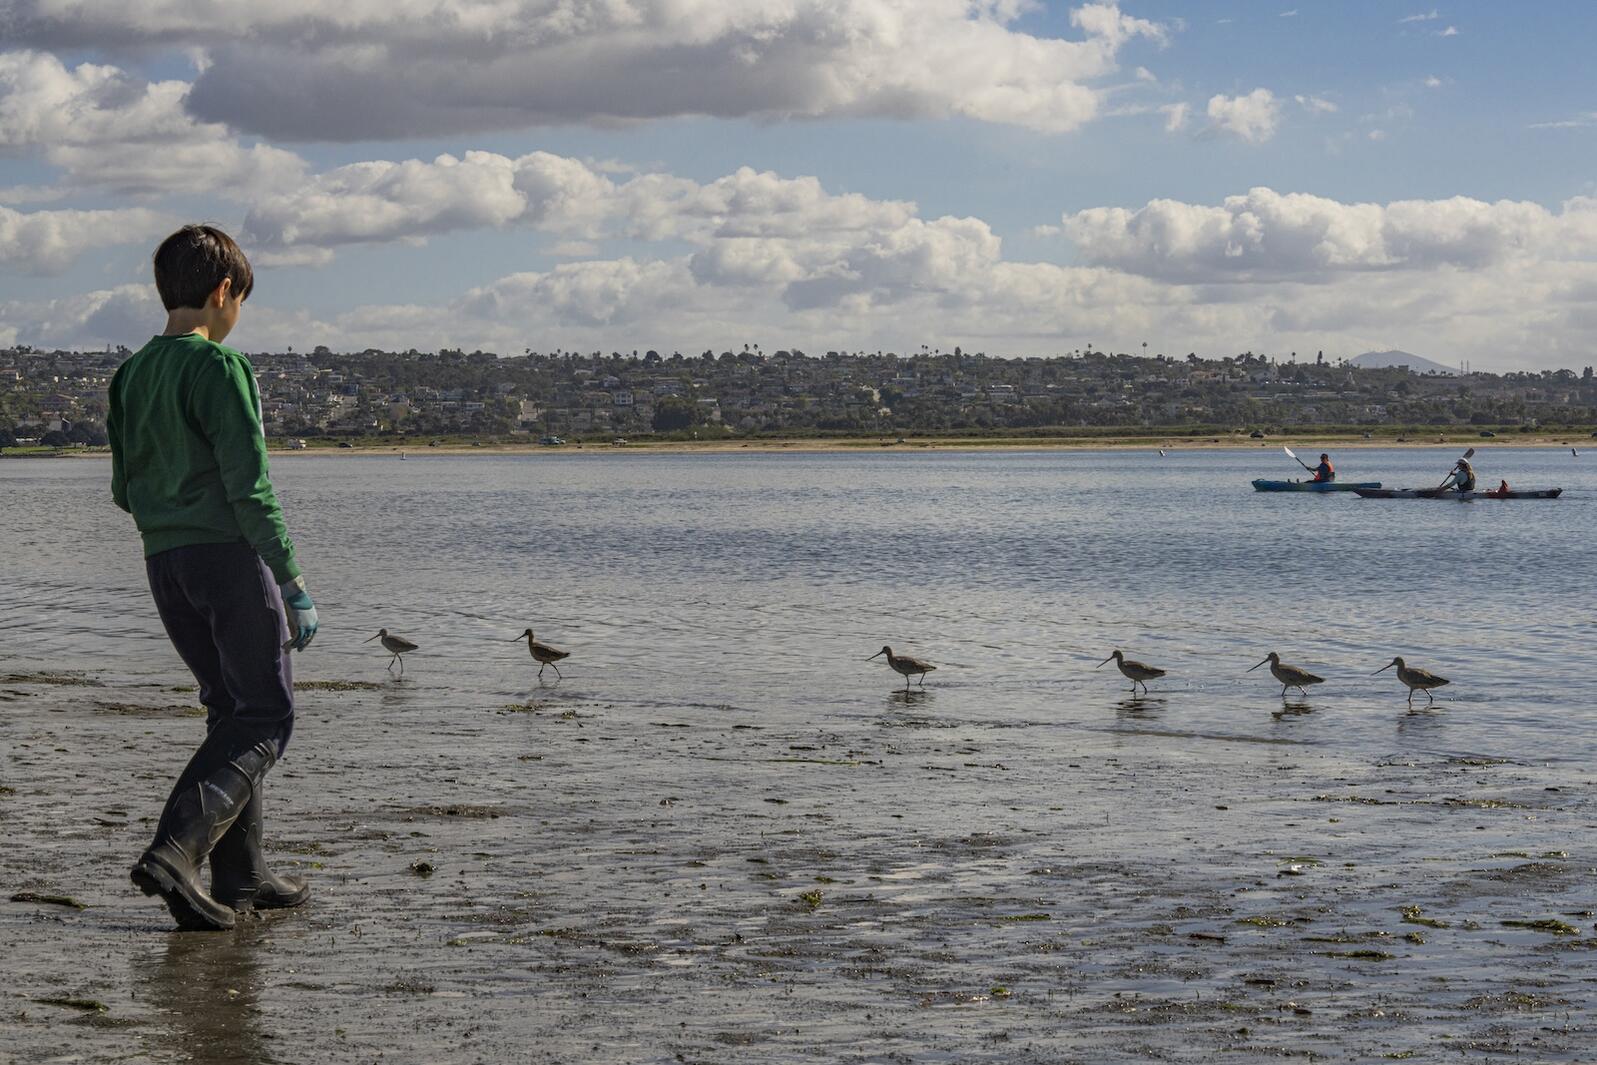 A young boy walks along the beach, with shorebirds and kayakers in the background